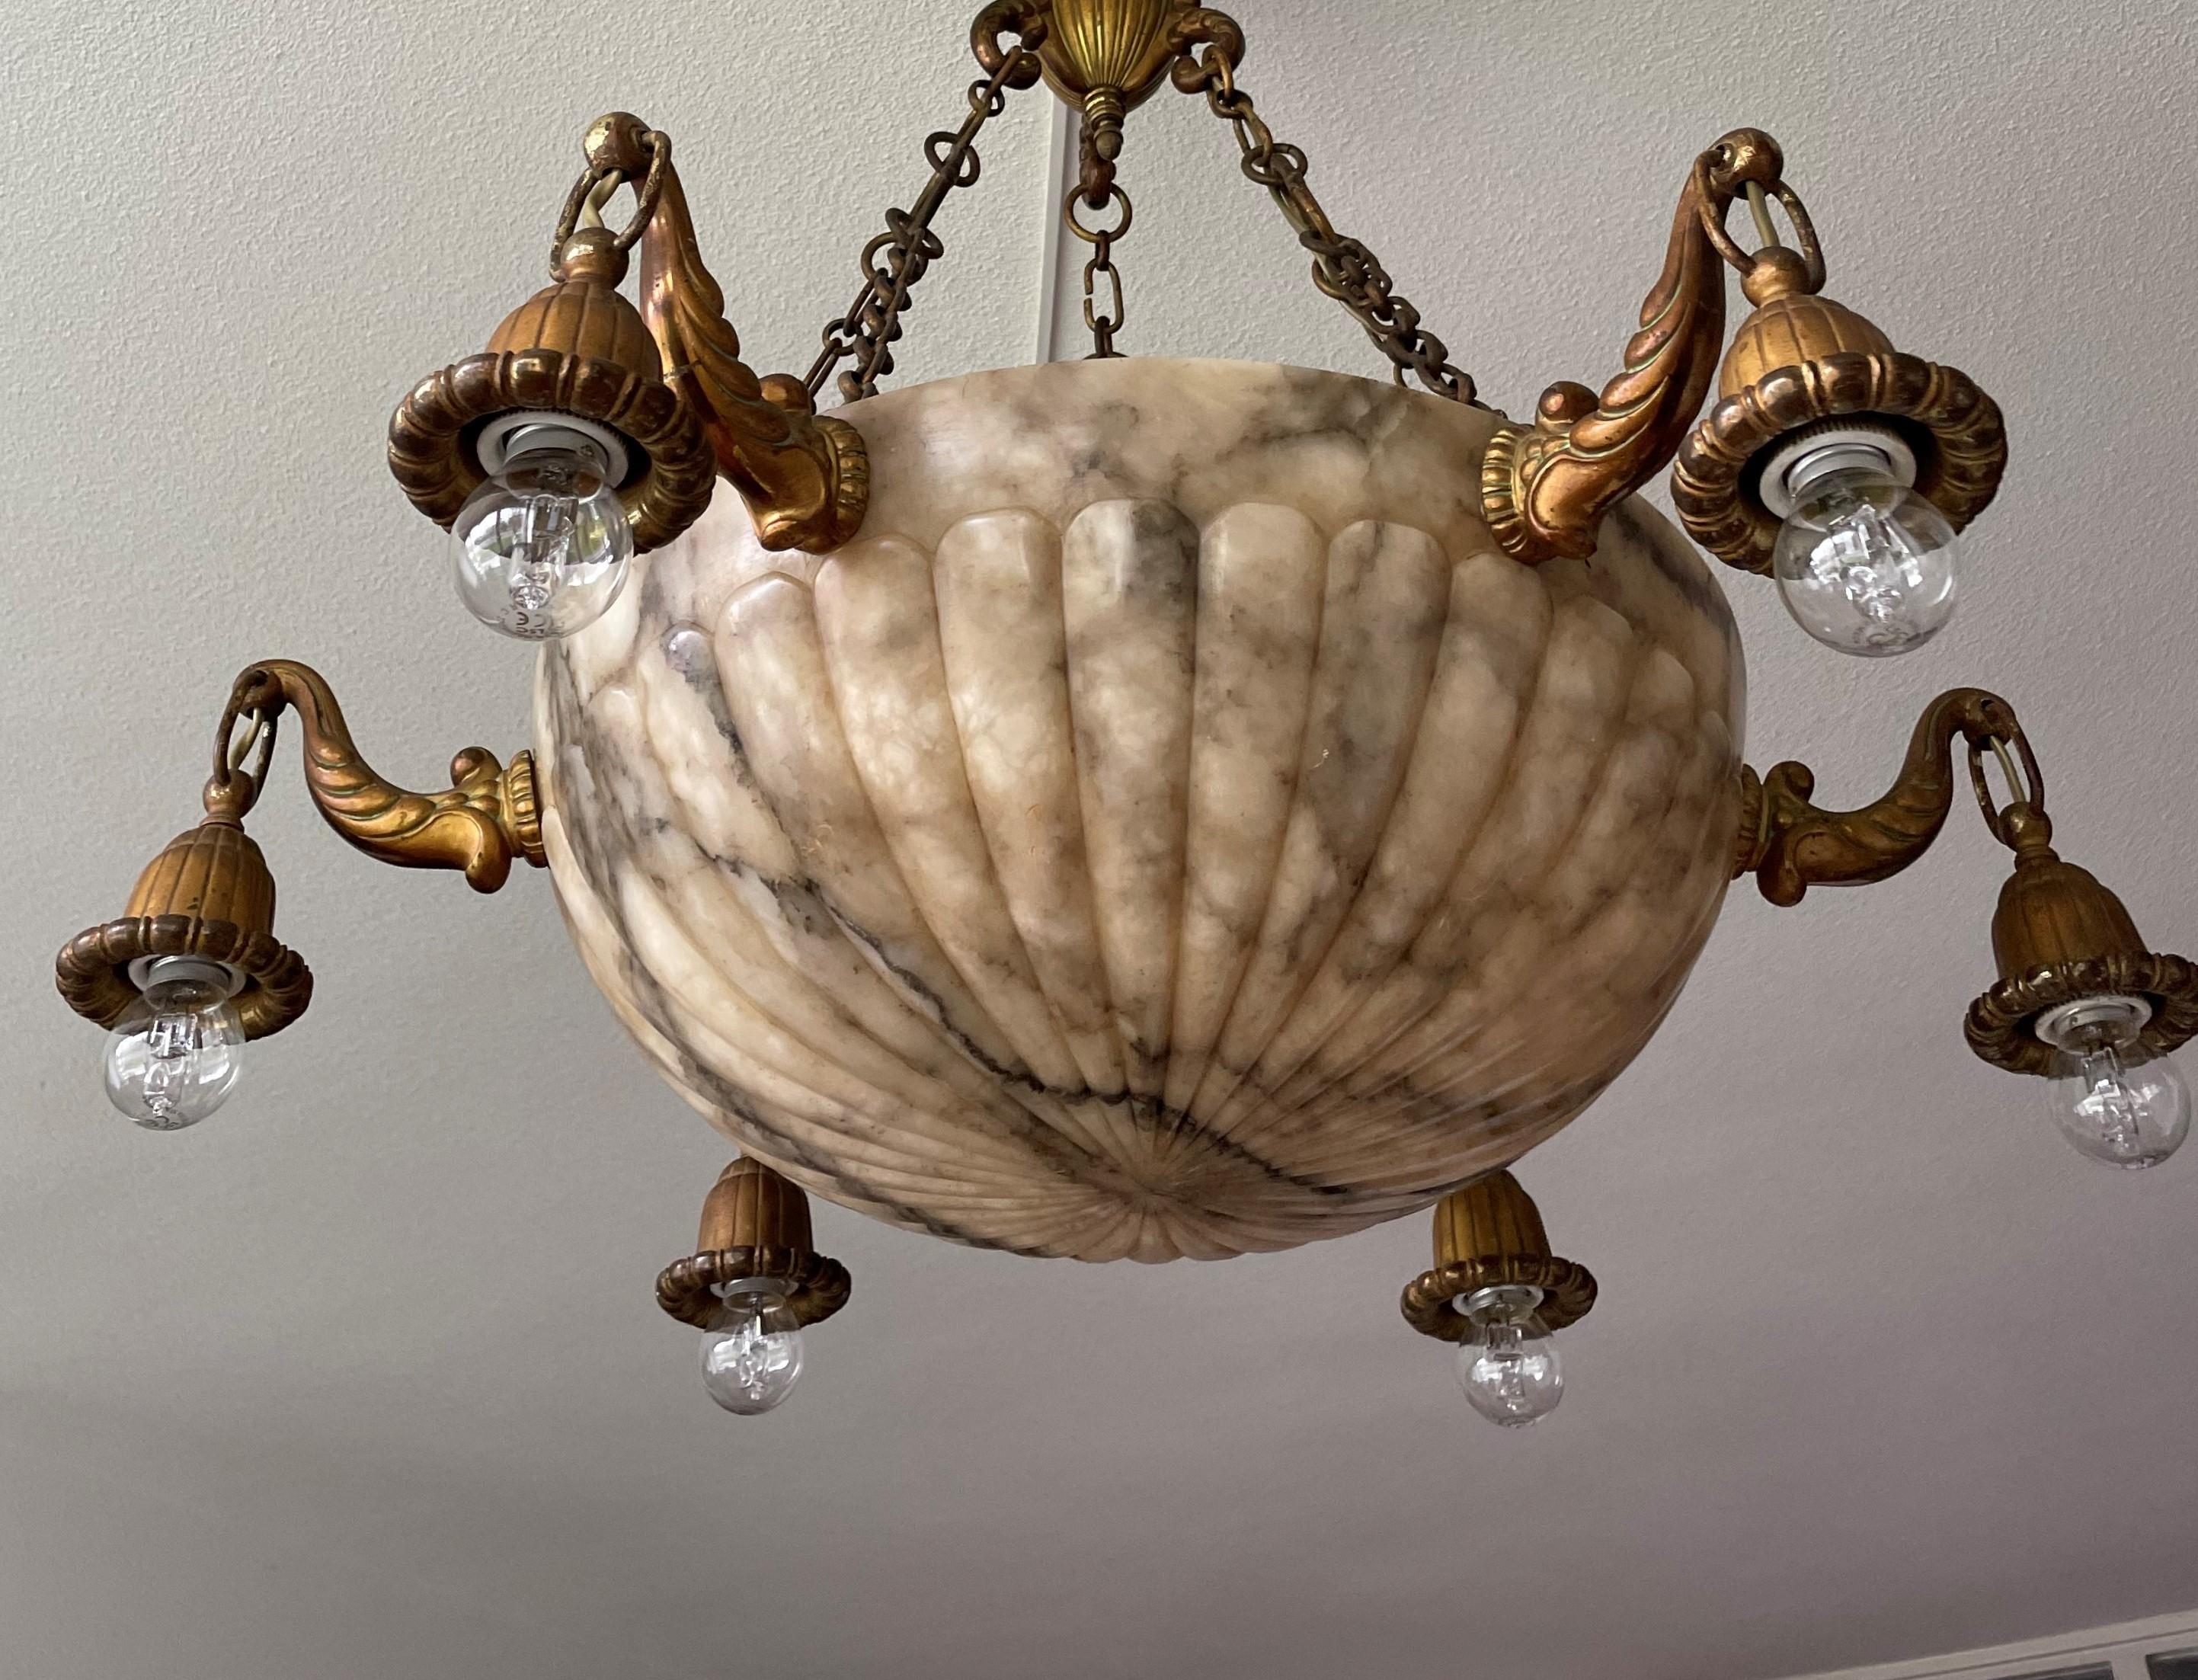 Antique and Stunning Gilt Bronze and Large Alabaster Shade Pendant / Chandelier For Sale 5